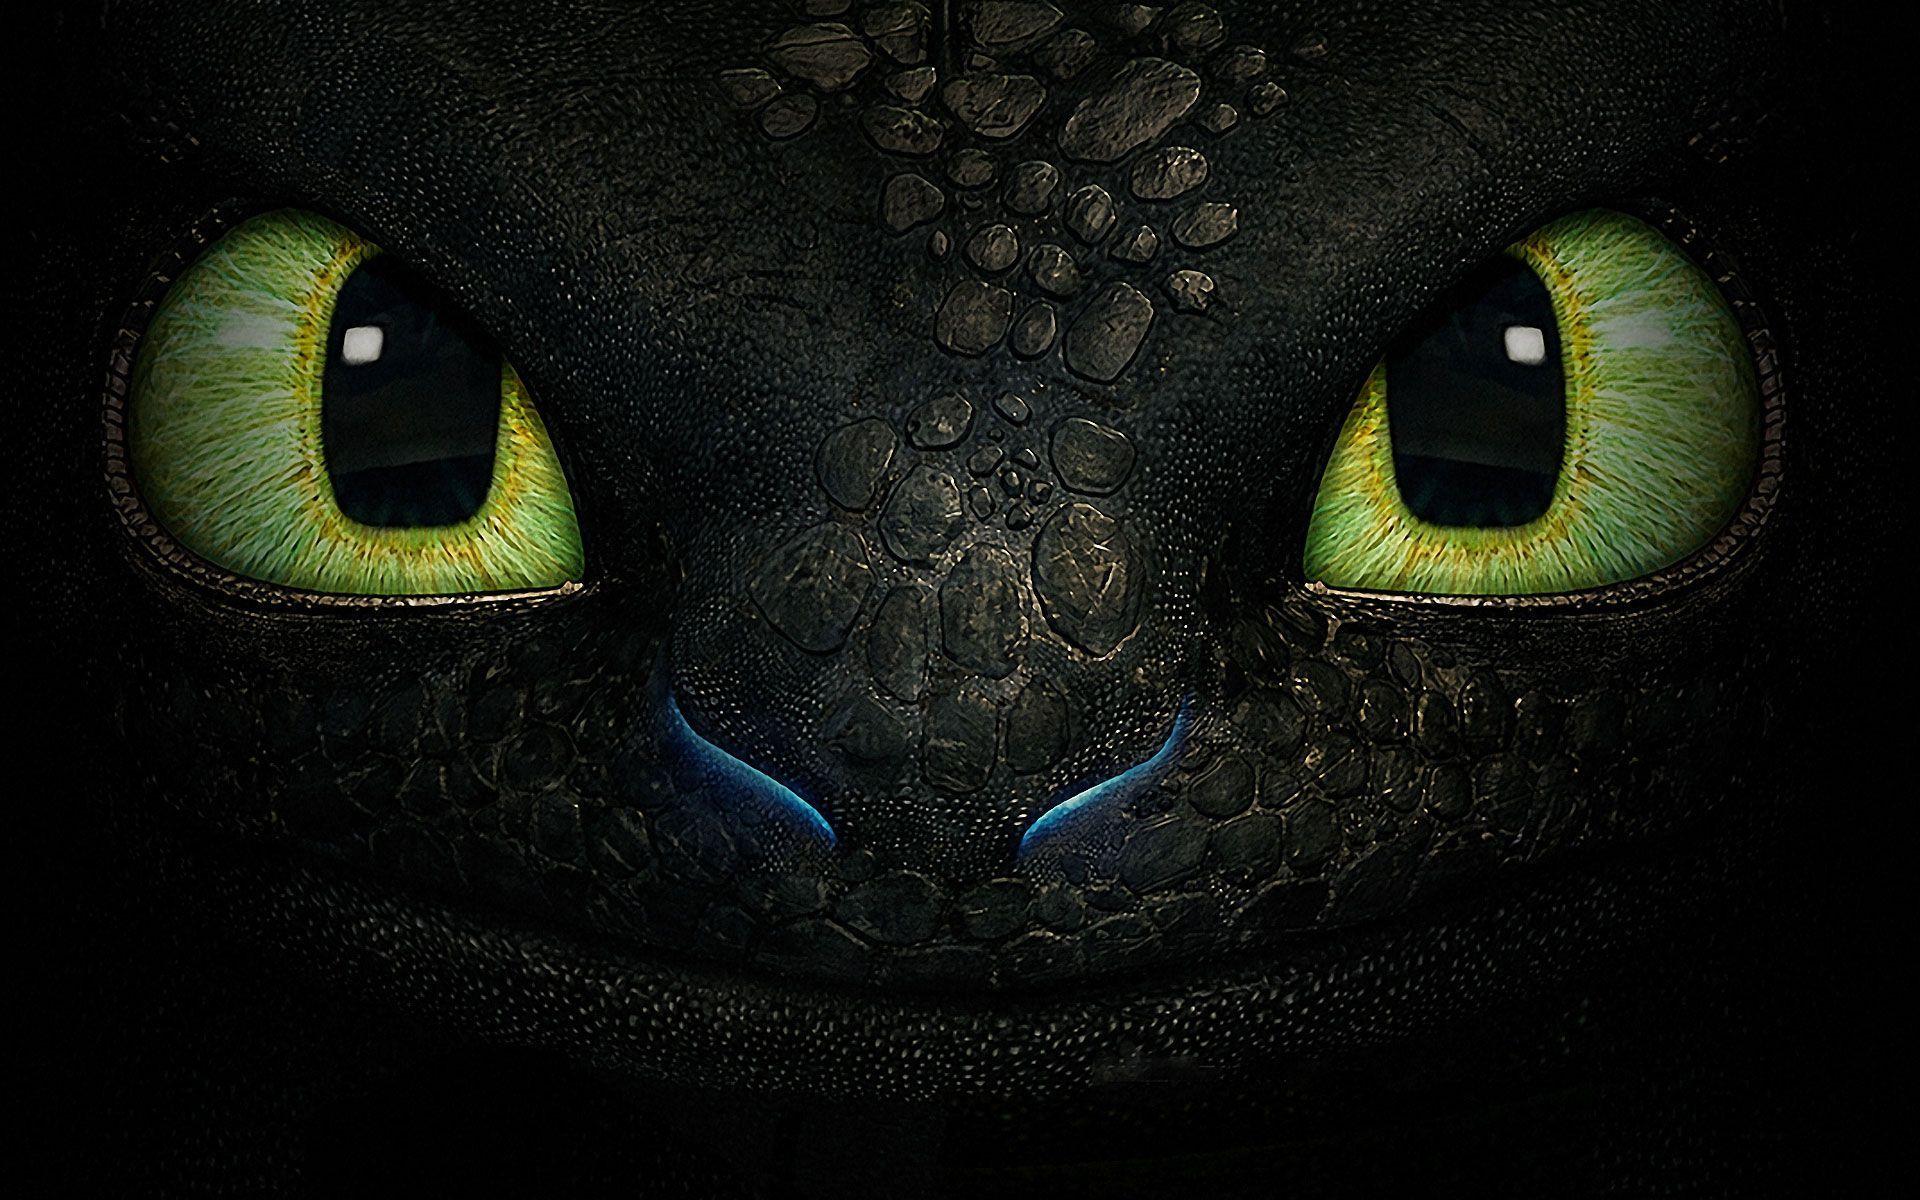 How to Train Your Dragon 2 Wallpaper HD Collection. Banguela